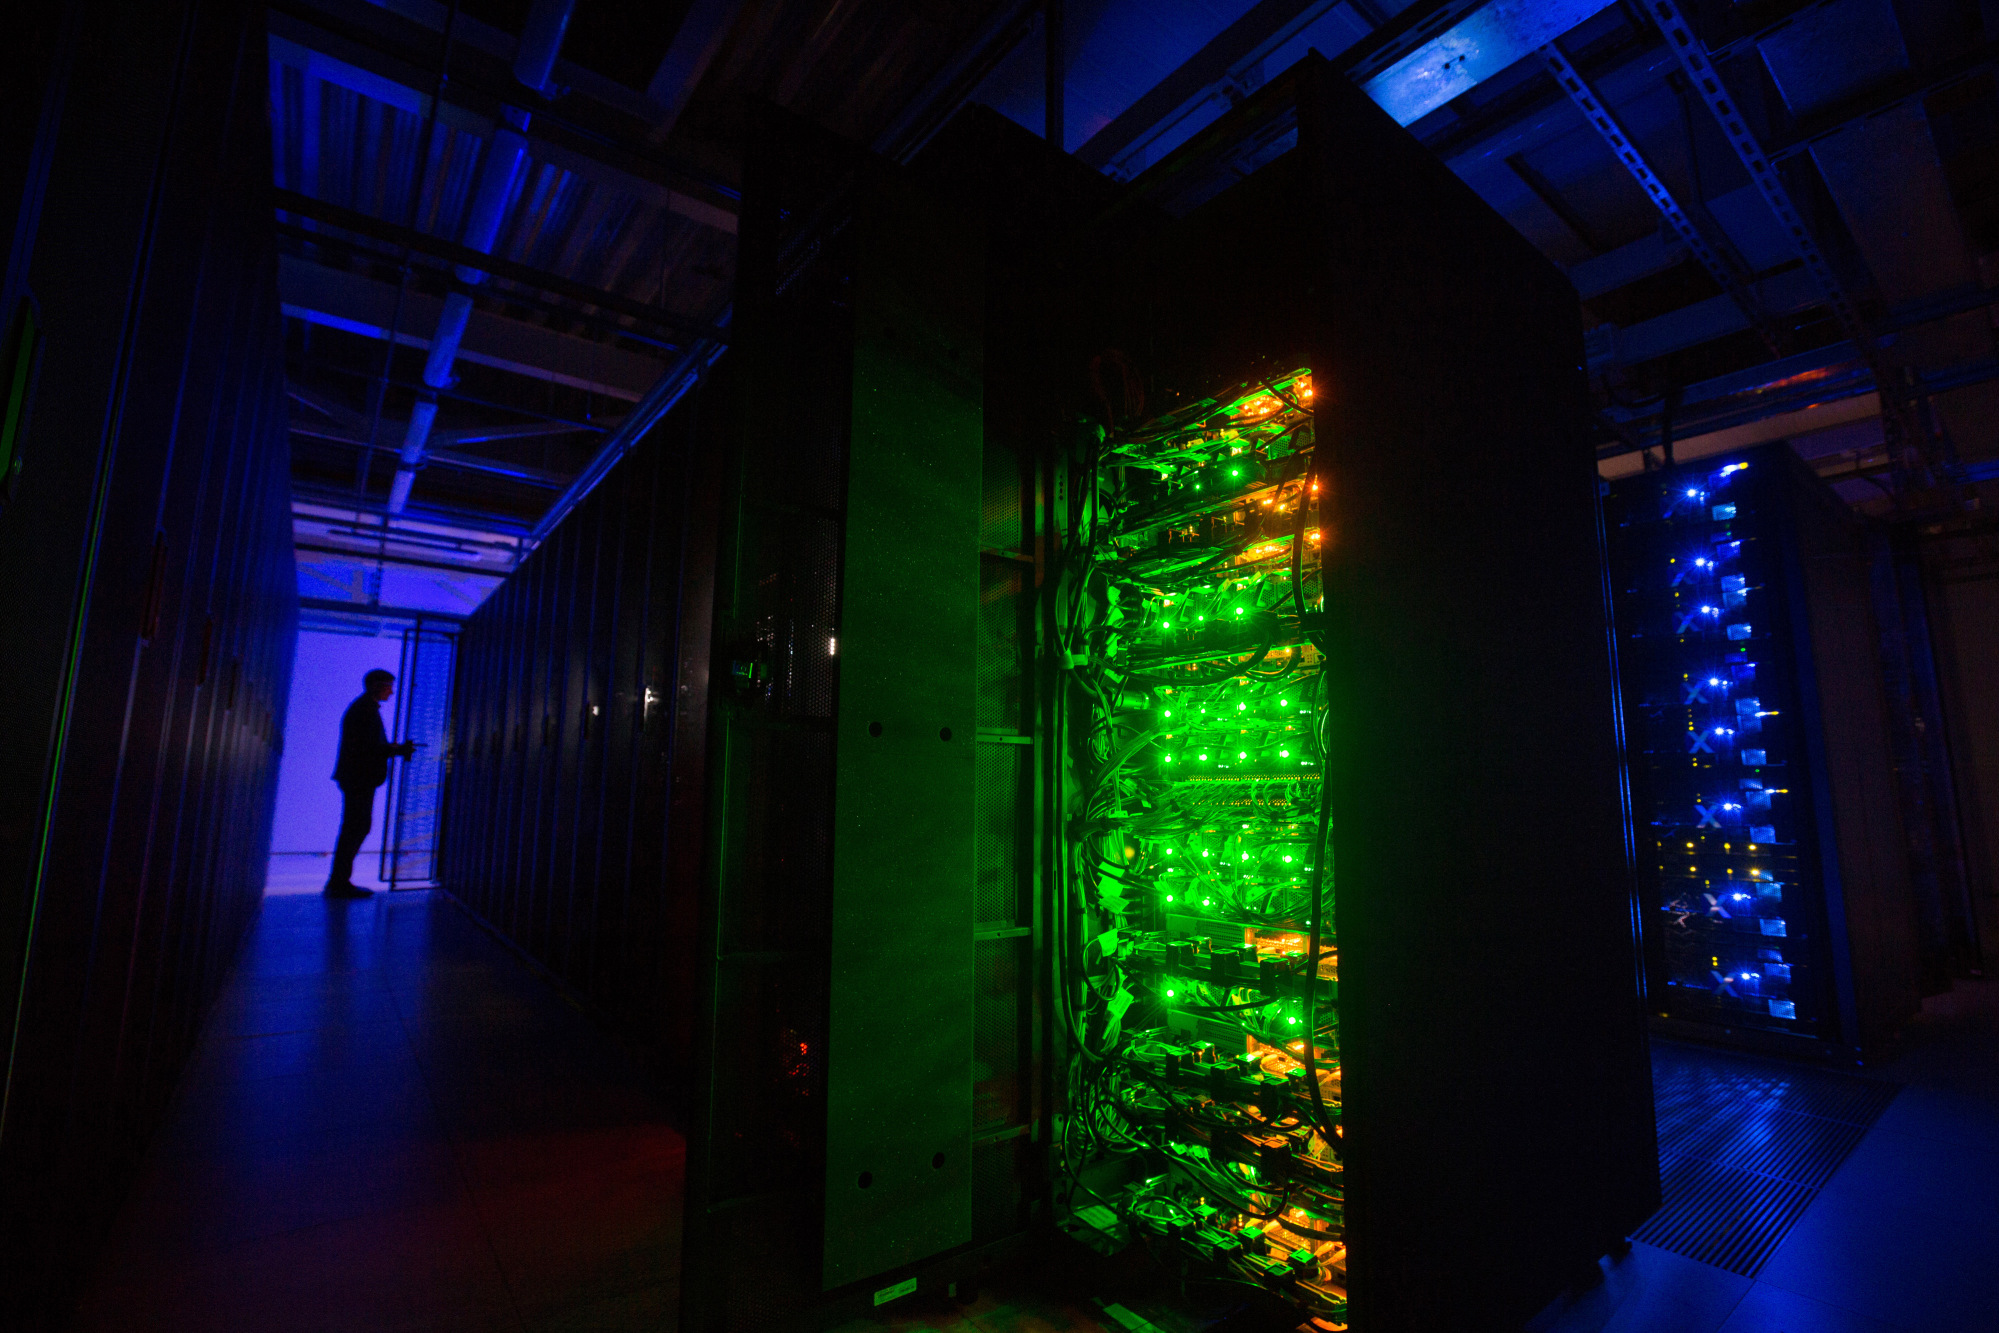 Lights illuminate racks of servers and data storage banks in the Sberbank PJSC data processing center (DPC) at the Skolkovo Innovation Center, in Moscow, Russia, on Tuesday, Dec. 26, 2017.&nbsp;